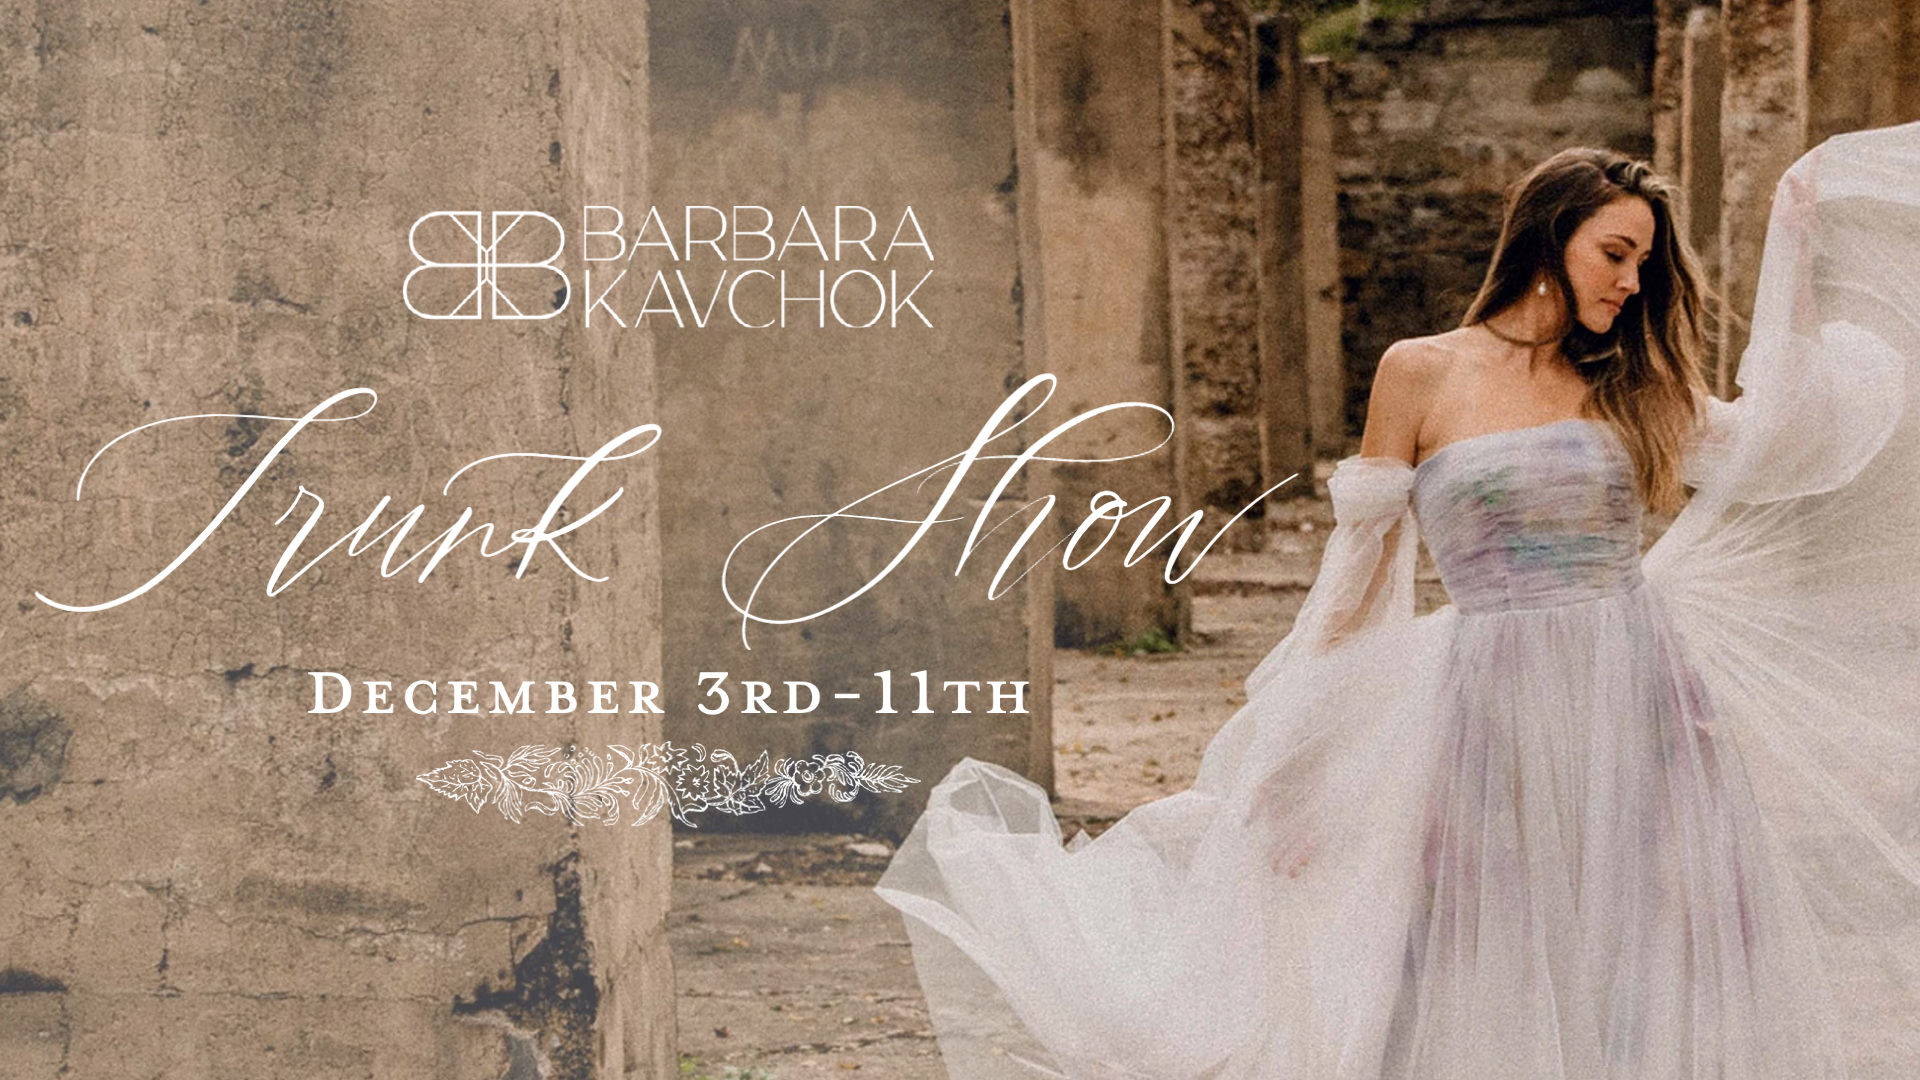 Barbara Kavchok Trunk Show at Stella's Bridal in Westminster, Maryland